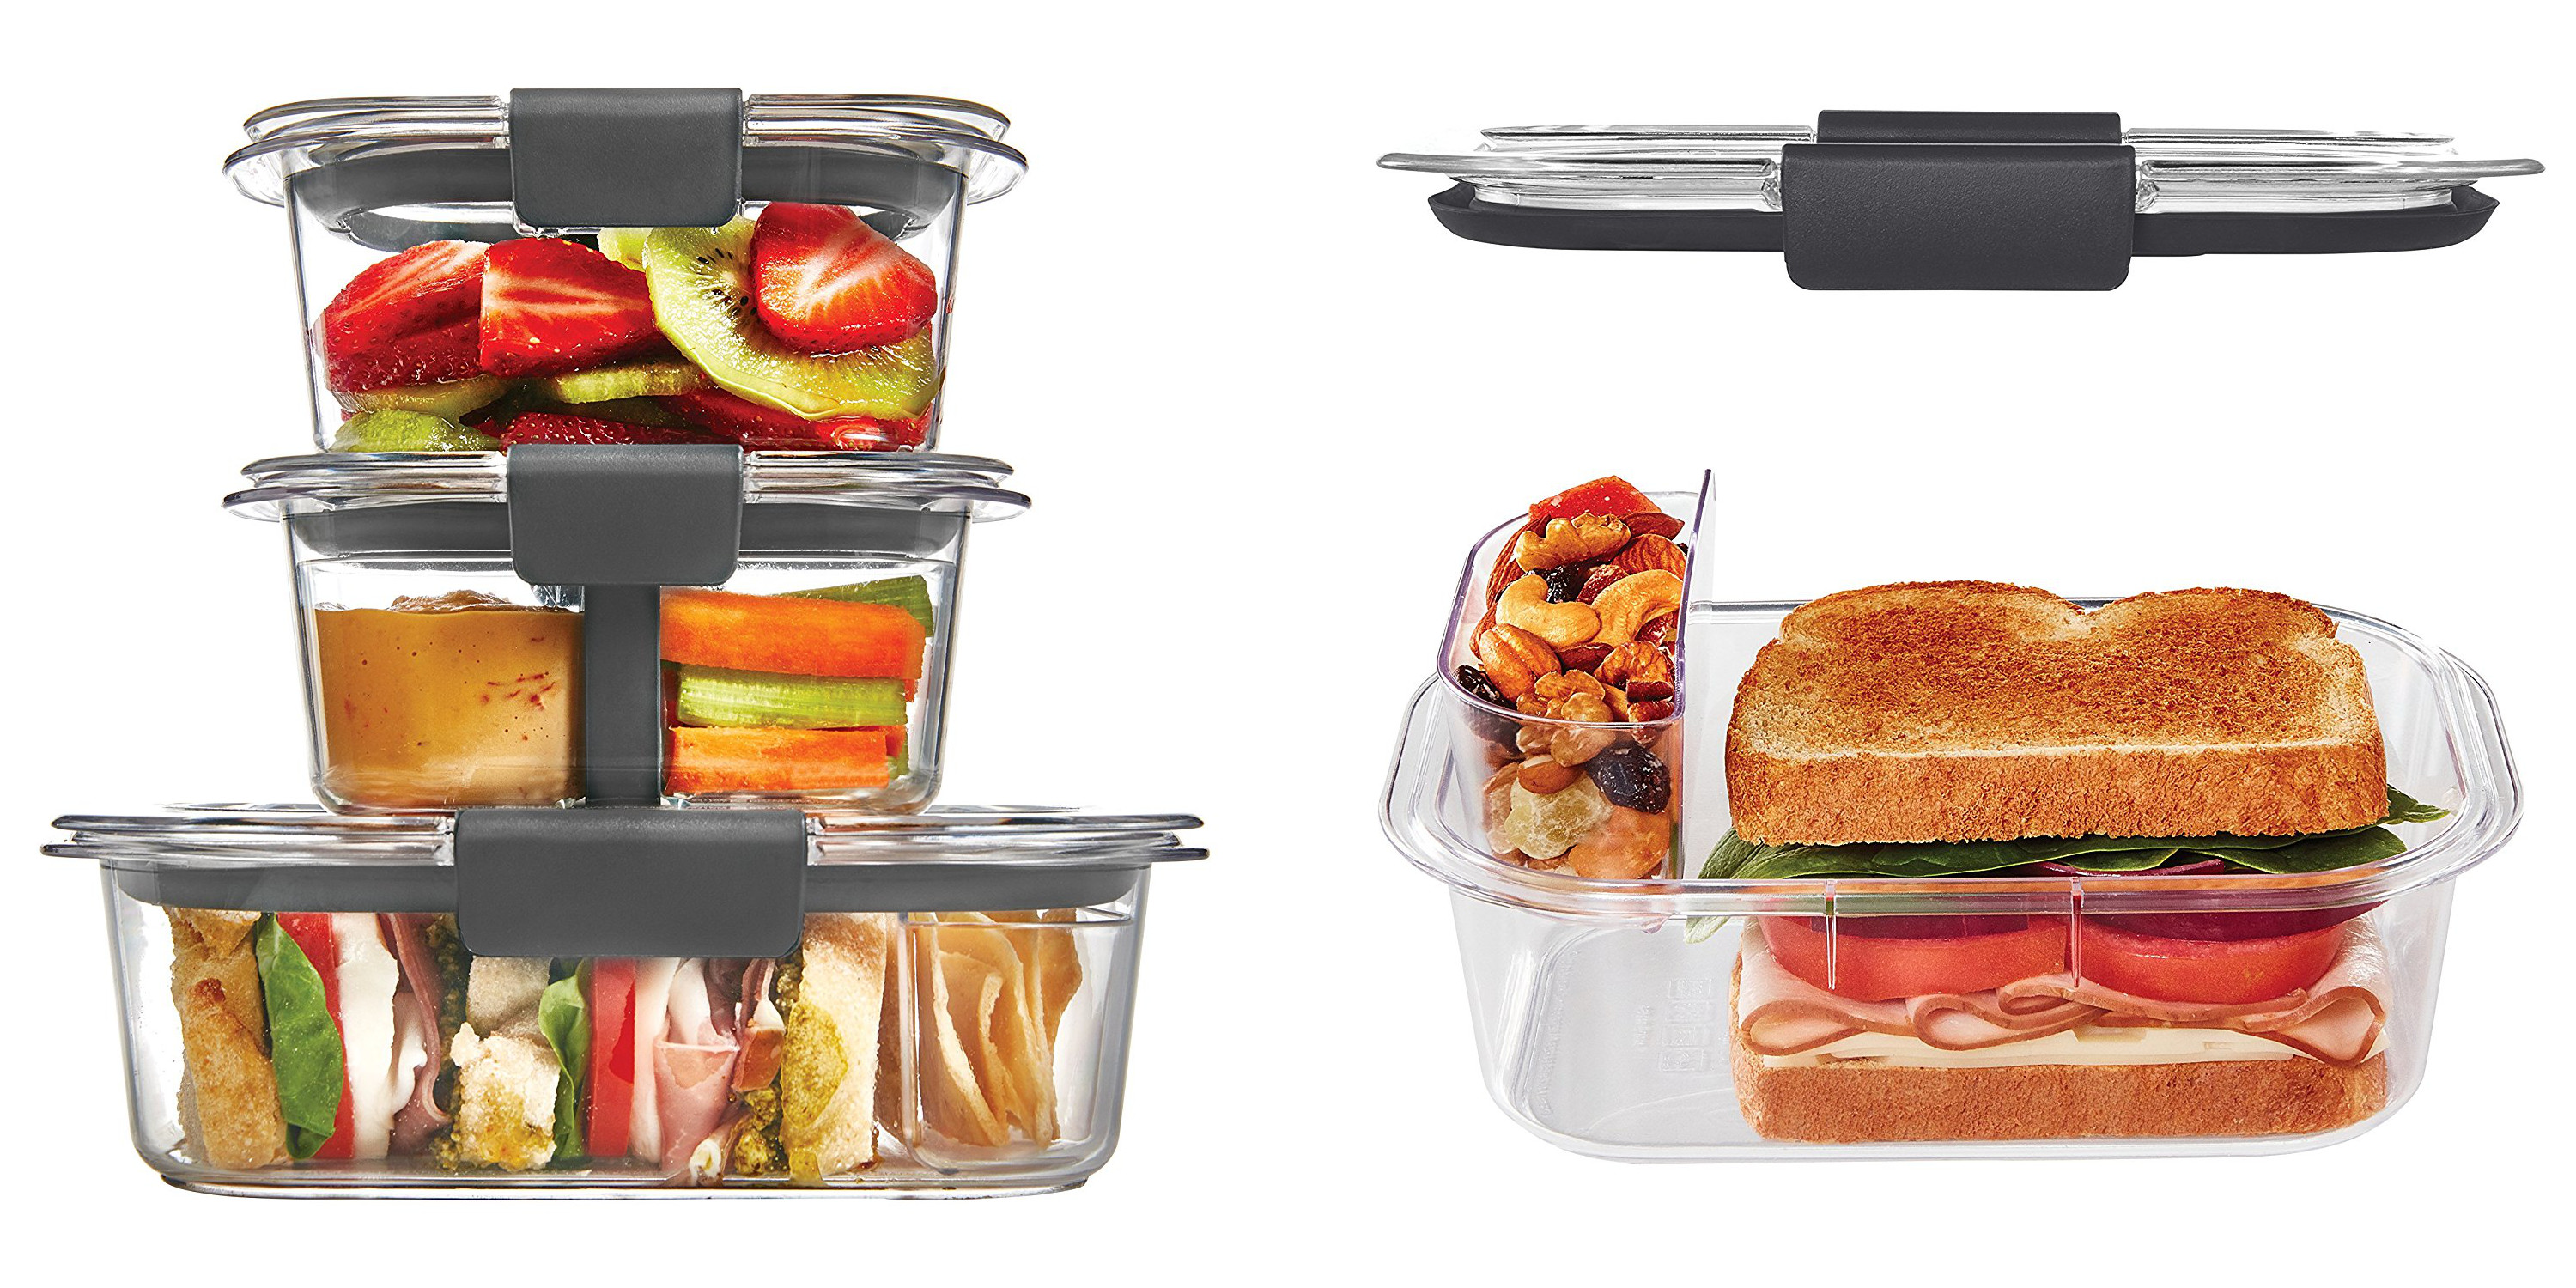 Rubbermaid's Brilliance Lunch Container Kit drops to $14 Prime shipped